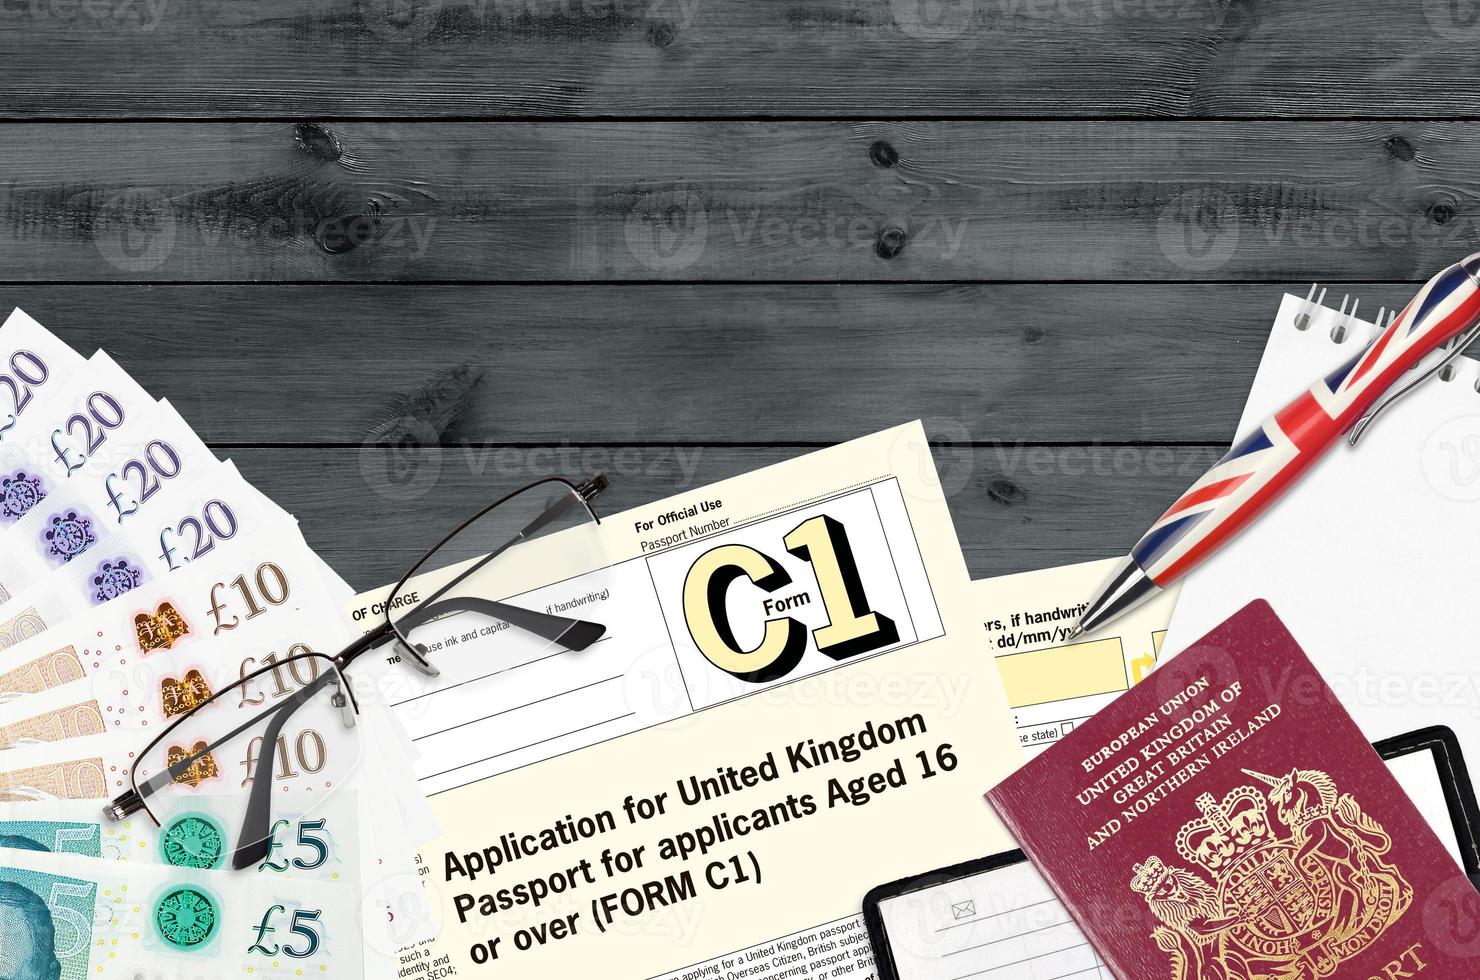 English form C1 Application for United Kingdom passport for applicants aged 16 or over lies on table with office items. UK passport paperwork photo